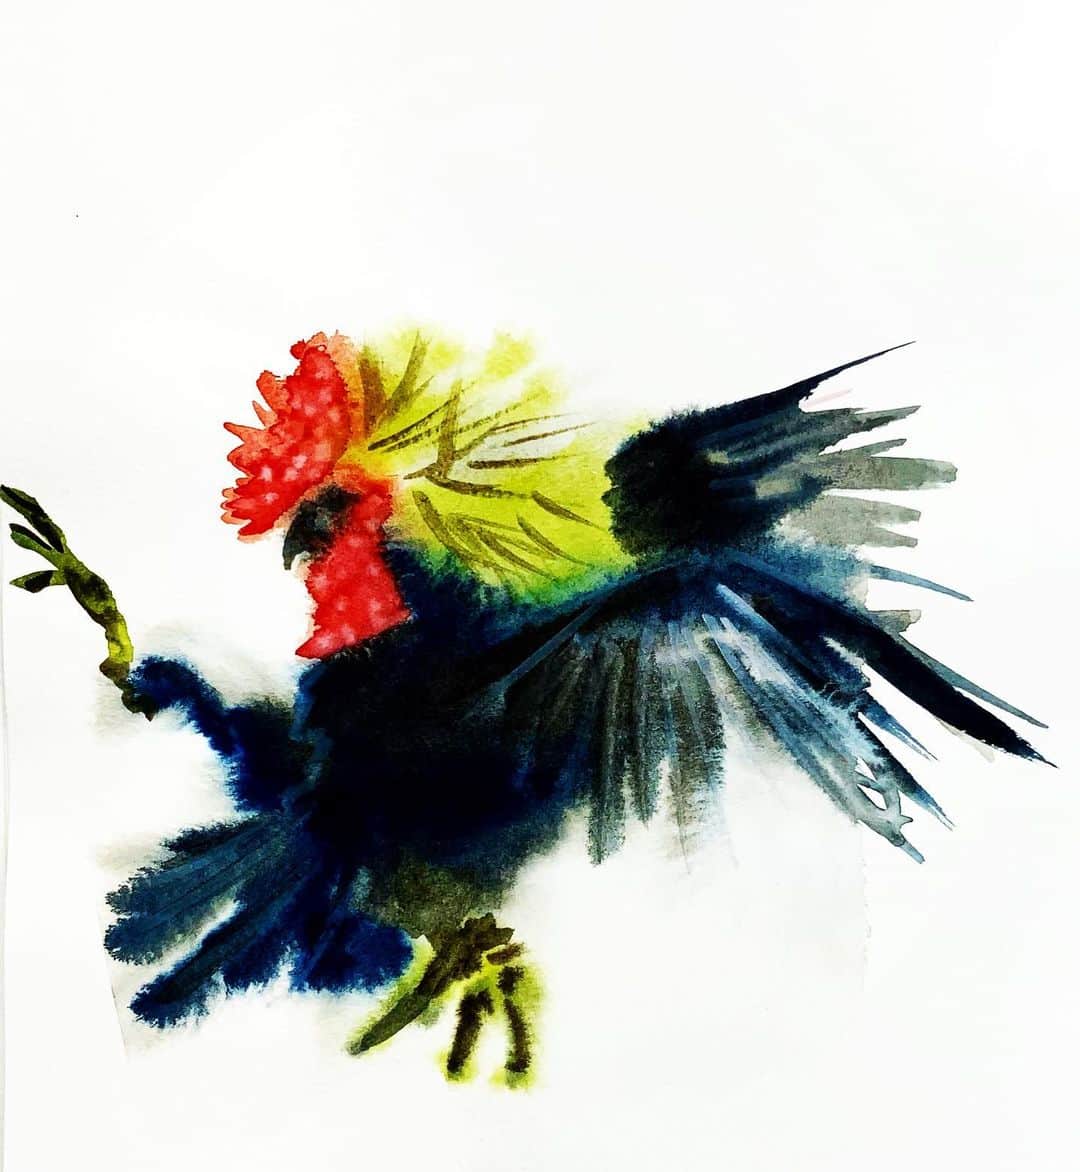 LiLi （矢野り々子）のインスタグラム：「雄鶏 rooster  lili 16yrs old  #雄鶏 #rooster #にわとり #illustration  #drawing #art  #watercolor #watercolorpainting  #矢野り々子」